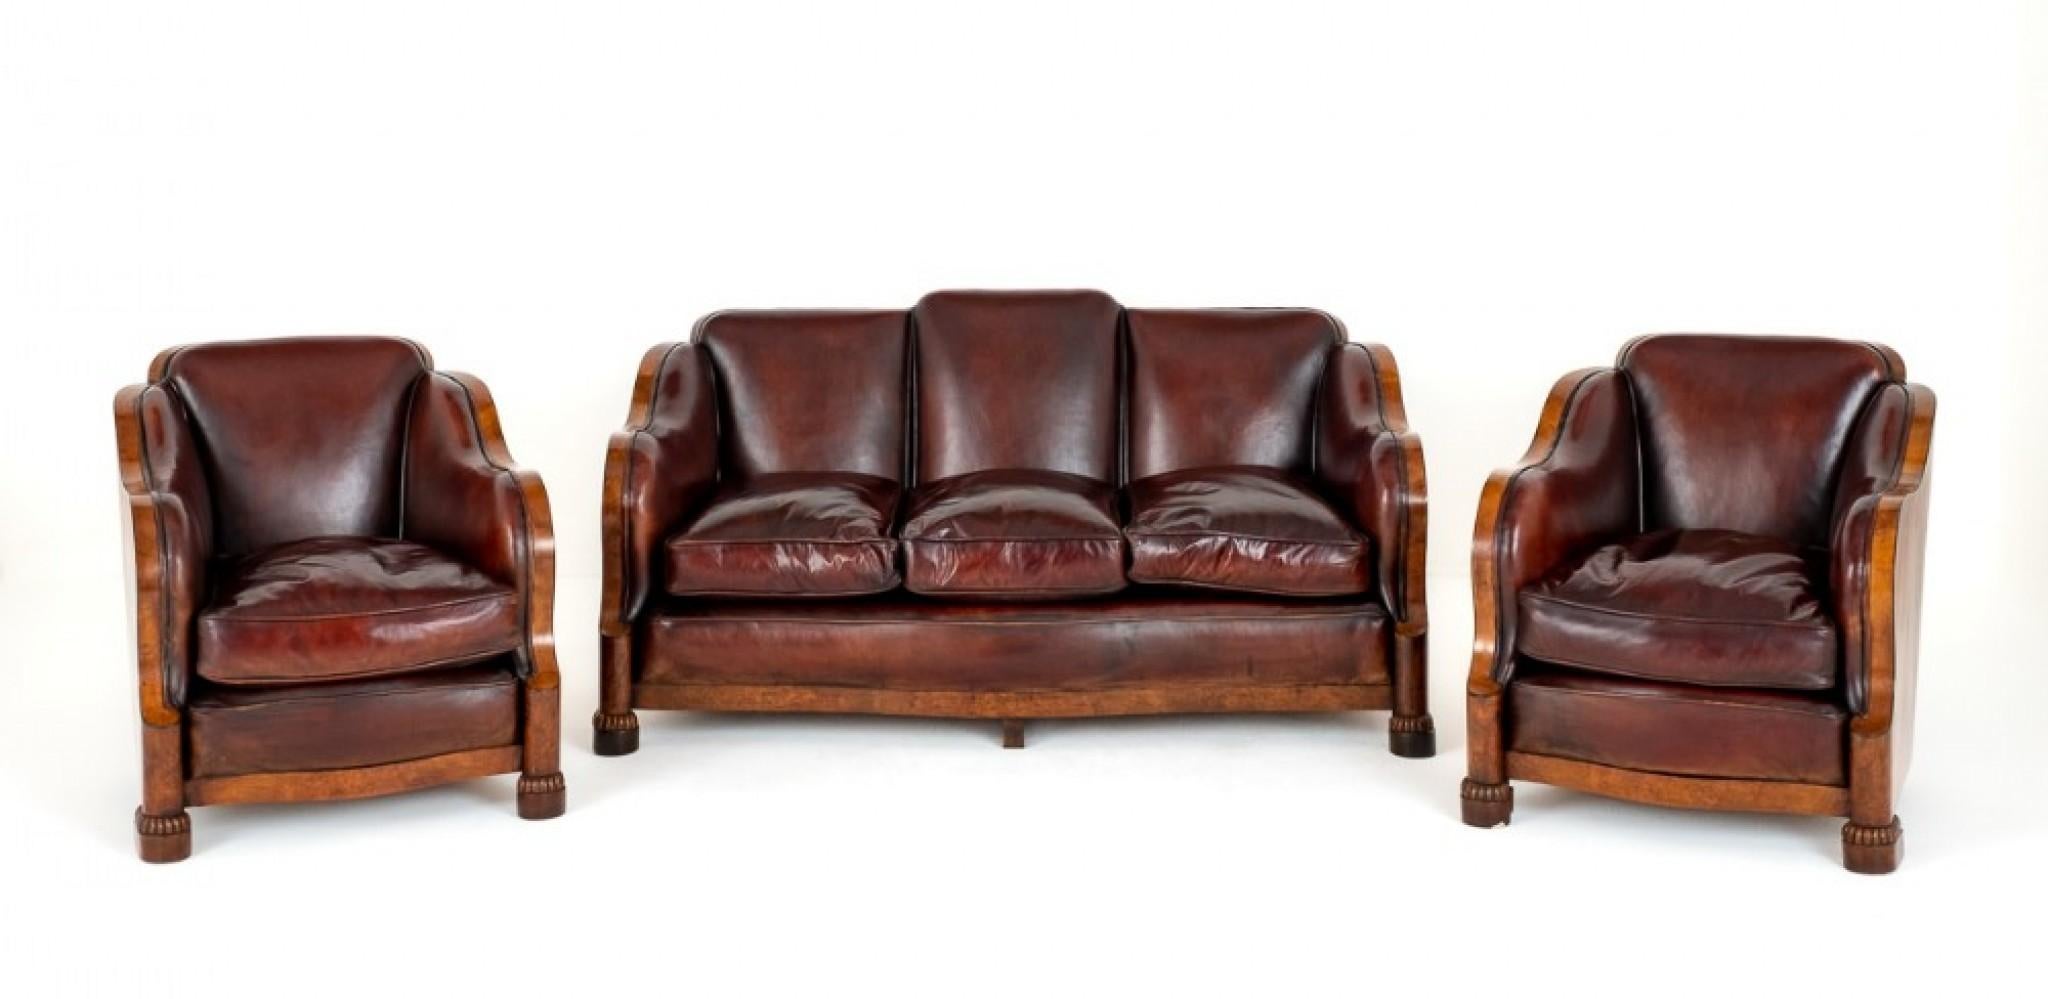 Stunning Art Deco Walnut Cloud Suite.
Here We Have a Very Good Example of an Art Deco Cloud Suite.
This Stunning Suite Being of a Shaped Form.
The Sumptuous Feather Cushions are Enveloped in a Walnut Art Deco Frame.
The Top Quality Leather on